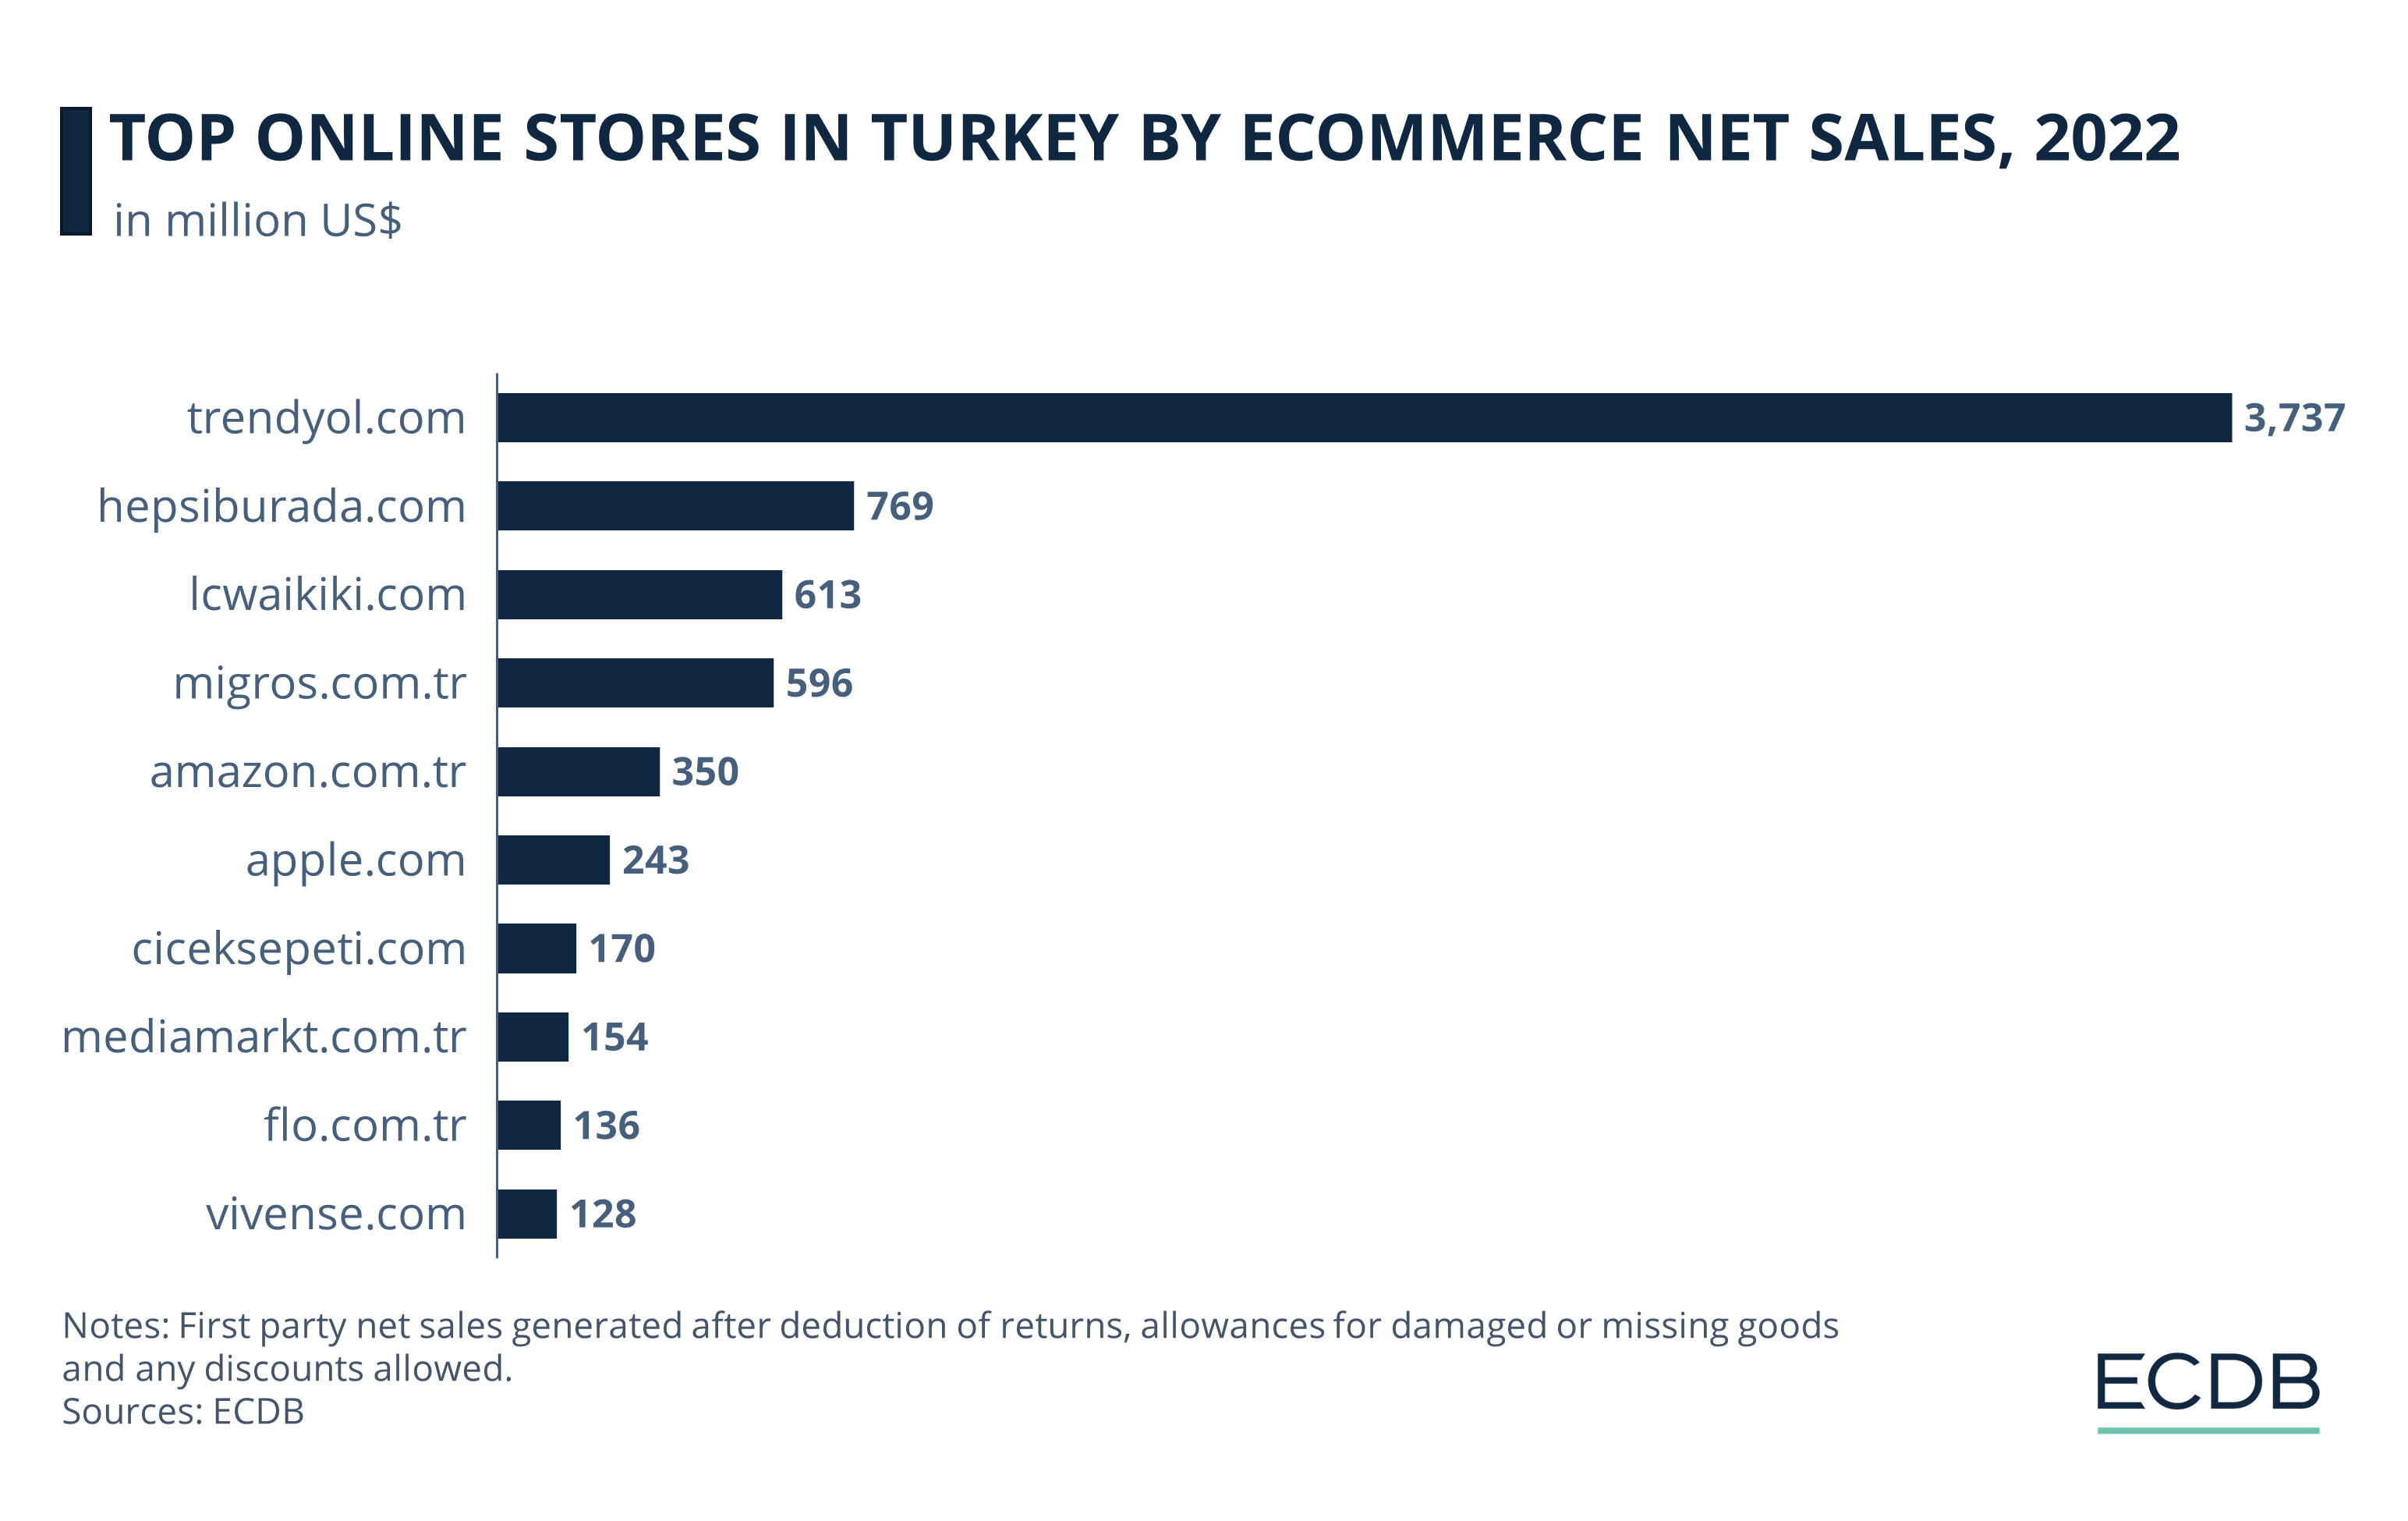 Top Online Stores in Turkey by eCommerce Net Sales, 2022